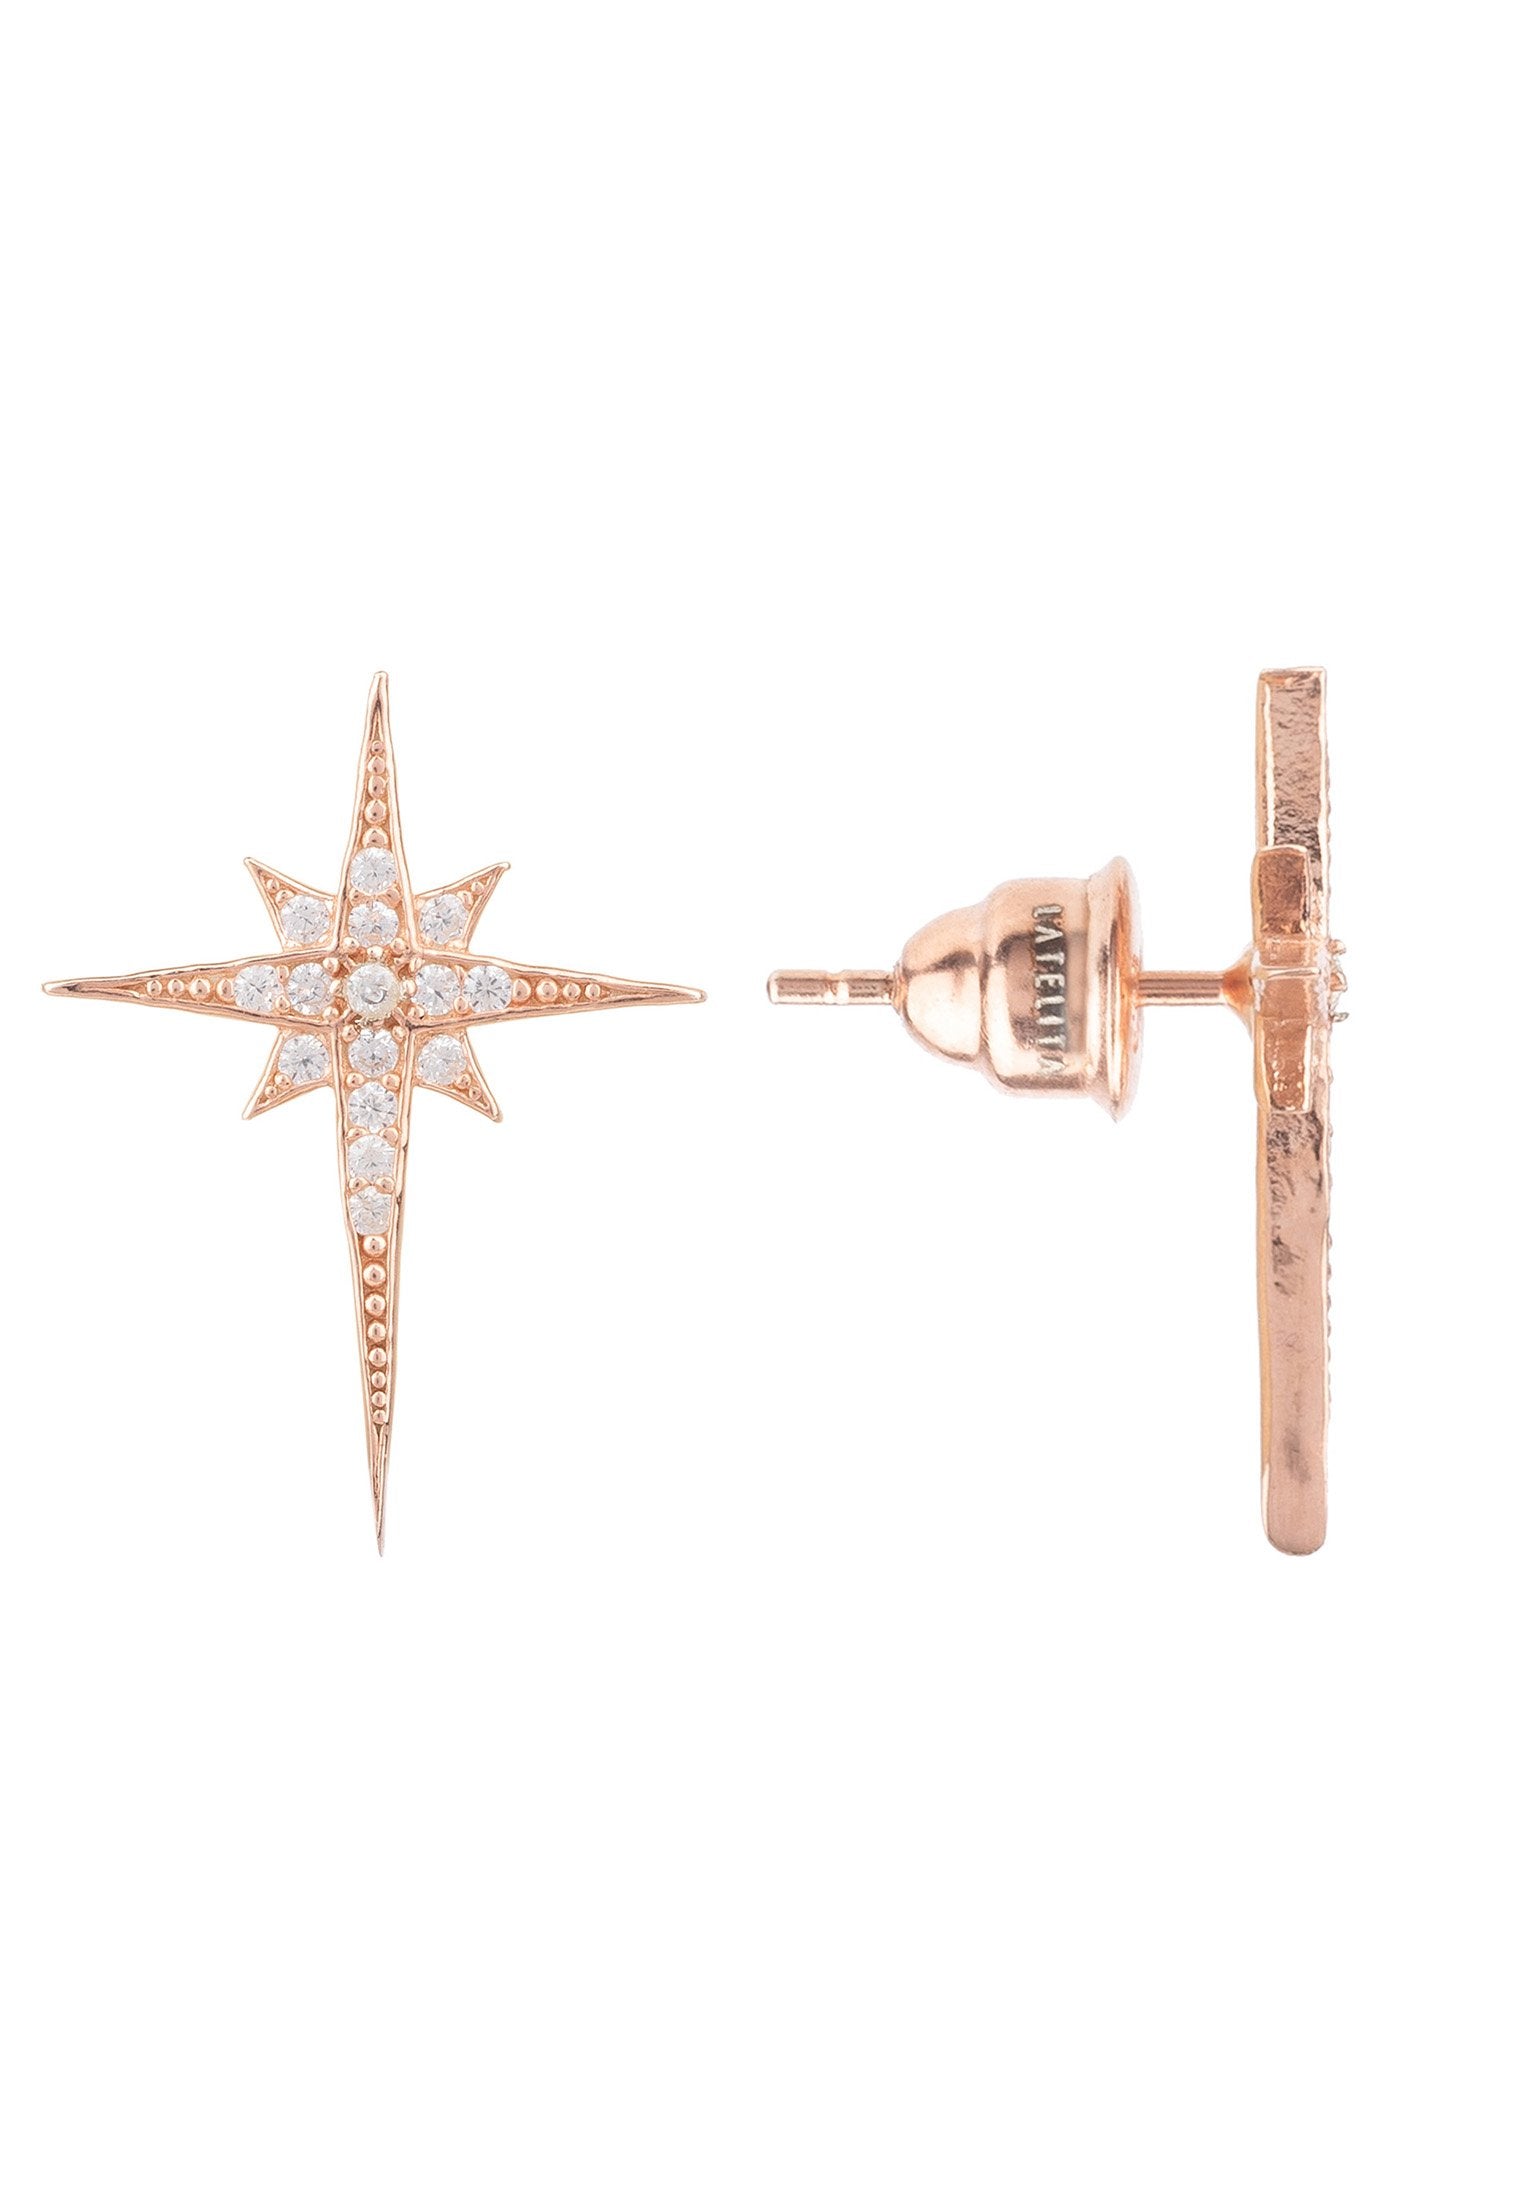 Rosegold North Star Stud Earrings with White Zirconia - Delicate and Glamorous Jewelry for Celebrations and Weddings - Jewelry & Watches - Bijou Her -  -  - 